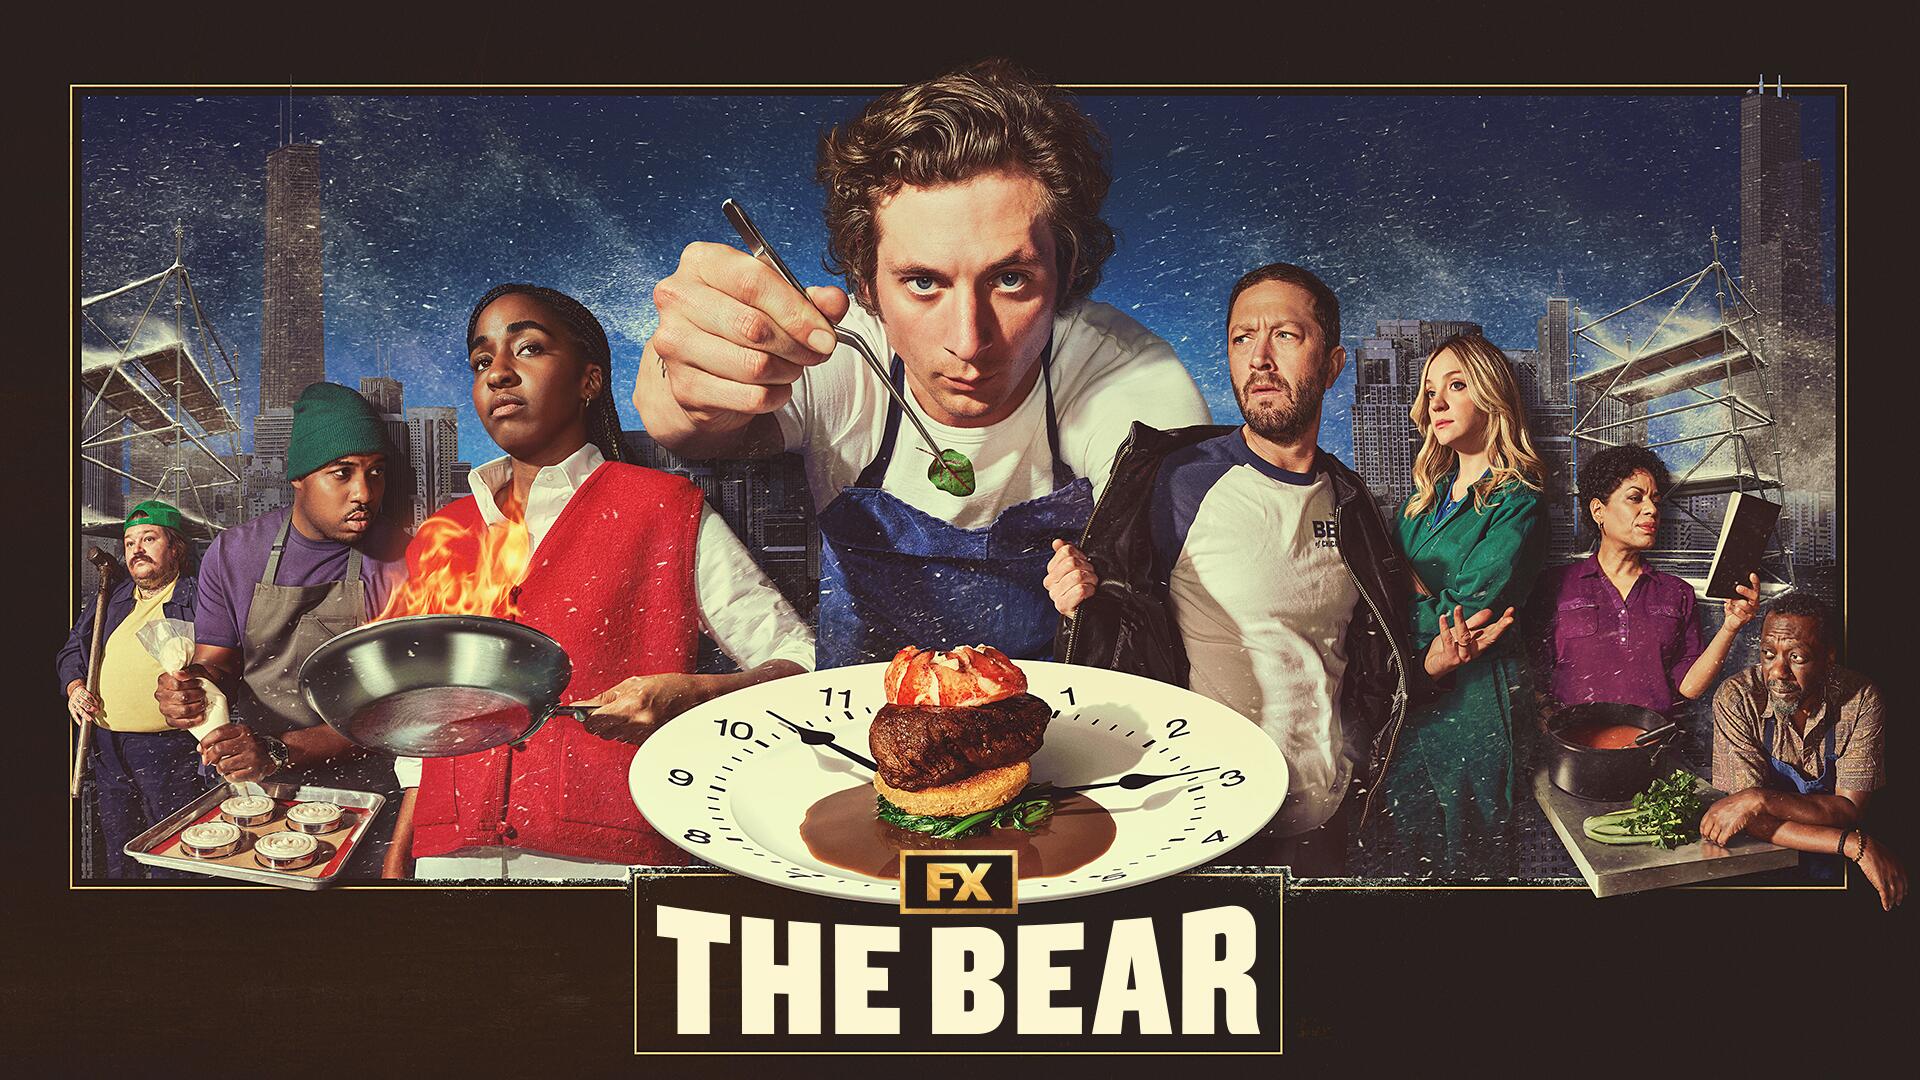 The Bear -- Season 2 -- Season two of FX’s “The Bear,” the critically acclaimed original series, follows Carmen “Carmy” Berzatto (Jeremy Allen White), Sydney Adamu (Ayo Edebiri) and Richard “Richie” Jerimovich (Ebon Moss- Bachrach) as they work to transform their grimy sandwich joint into a next-level spot. As they strip the restaurant down to its bones, the crew undertakes transformational journeys of their own, each forced to confront the past and reckon with who they want to be in the future. (Courtesy of FX.)